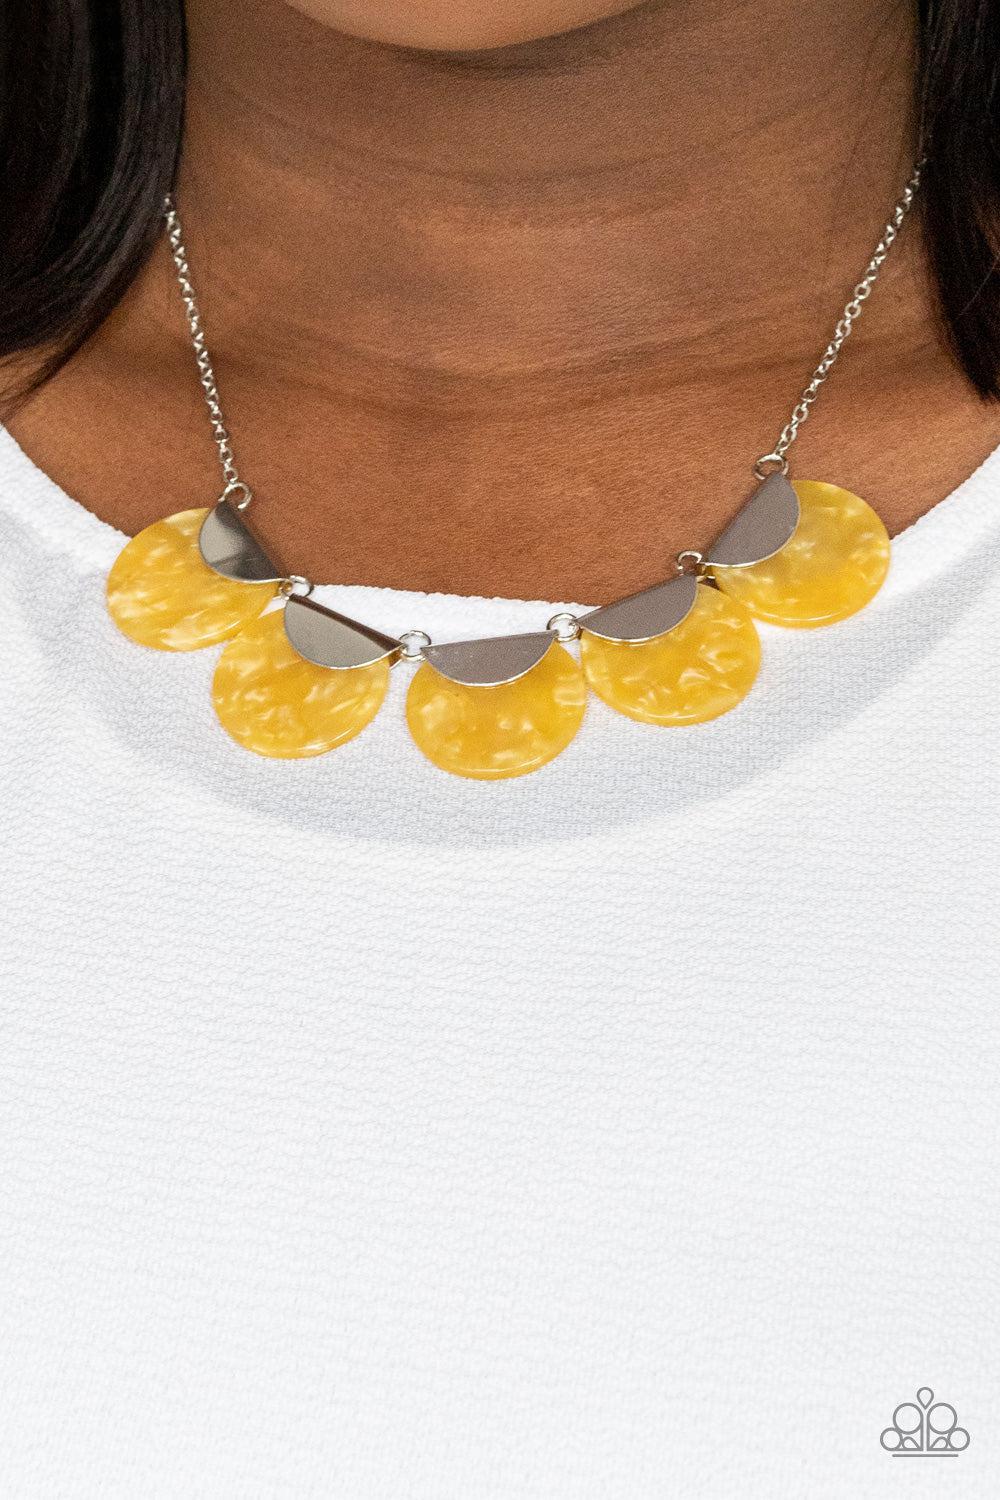 Mermaid Oasis Yellow Acrylic Necklace - Paparazzi Accessories-on model - CarasShop.com - $5 Jewelry by Cara Jewels